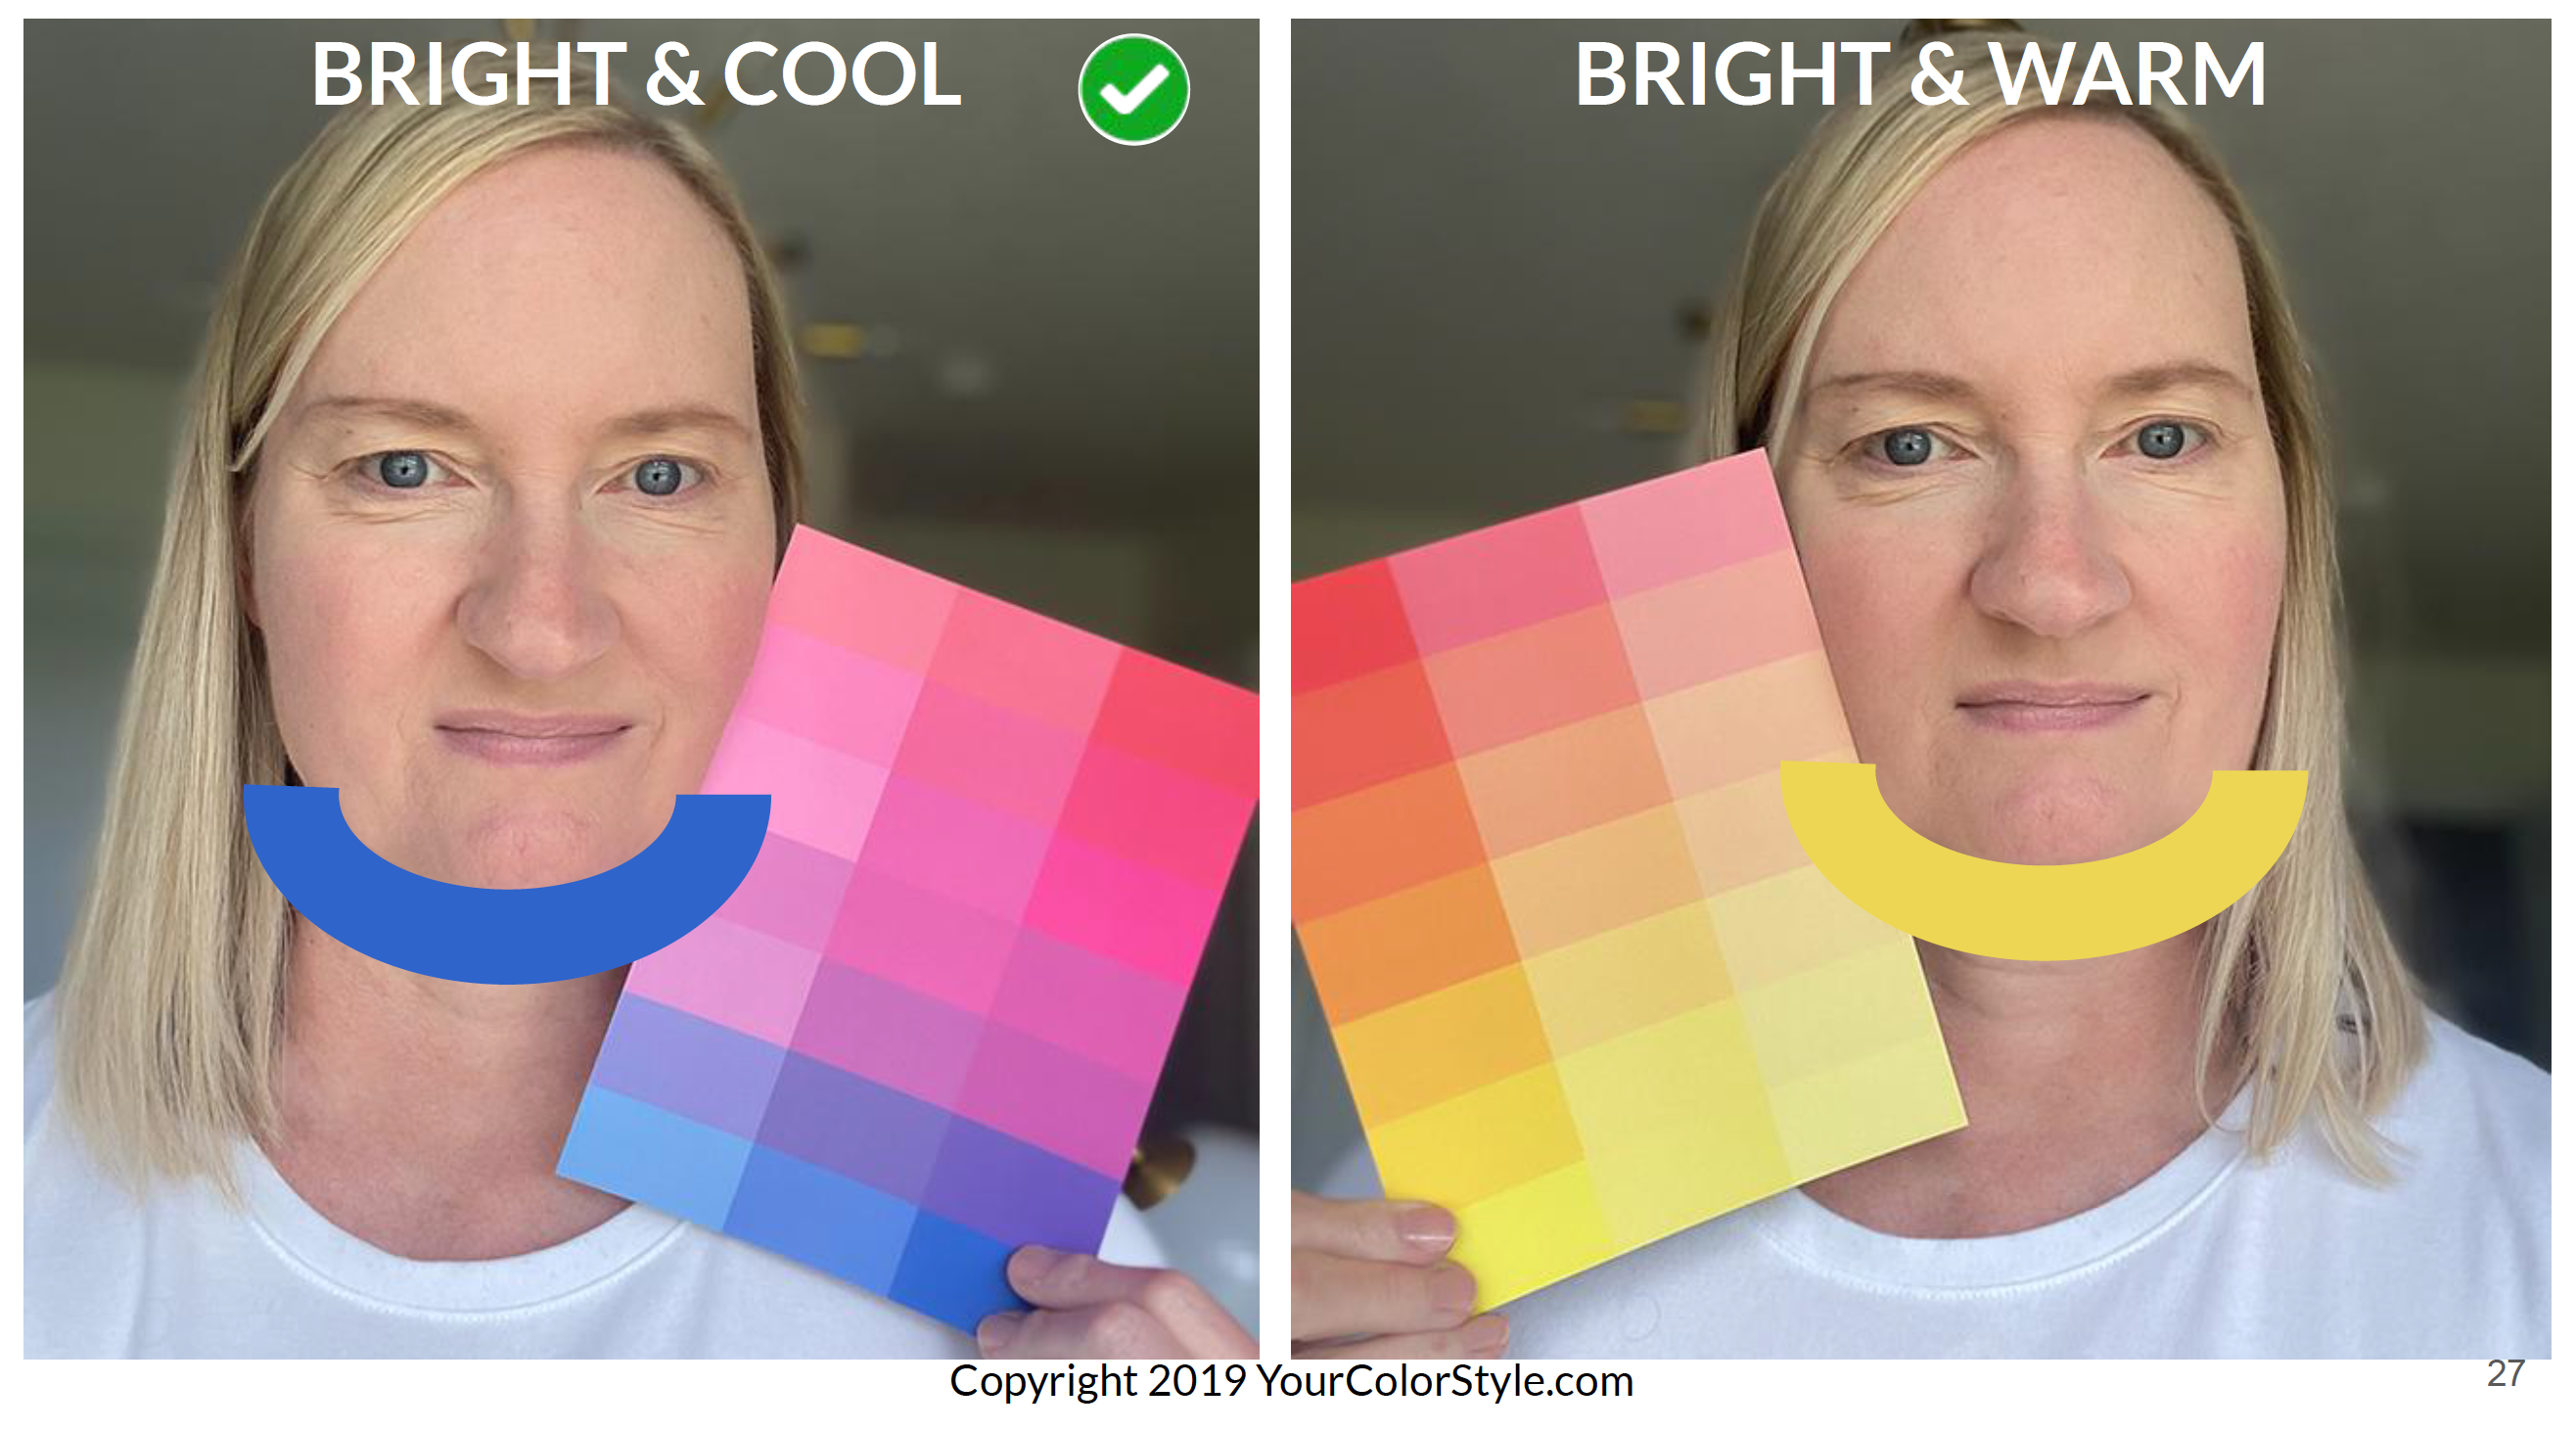 Everything You Need to Know About Professional Color Analysis